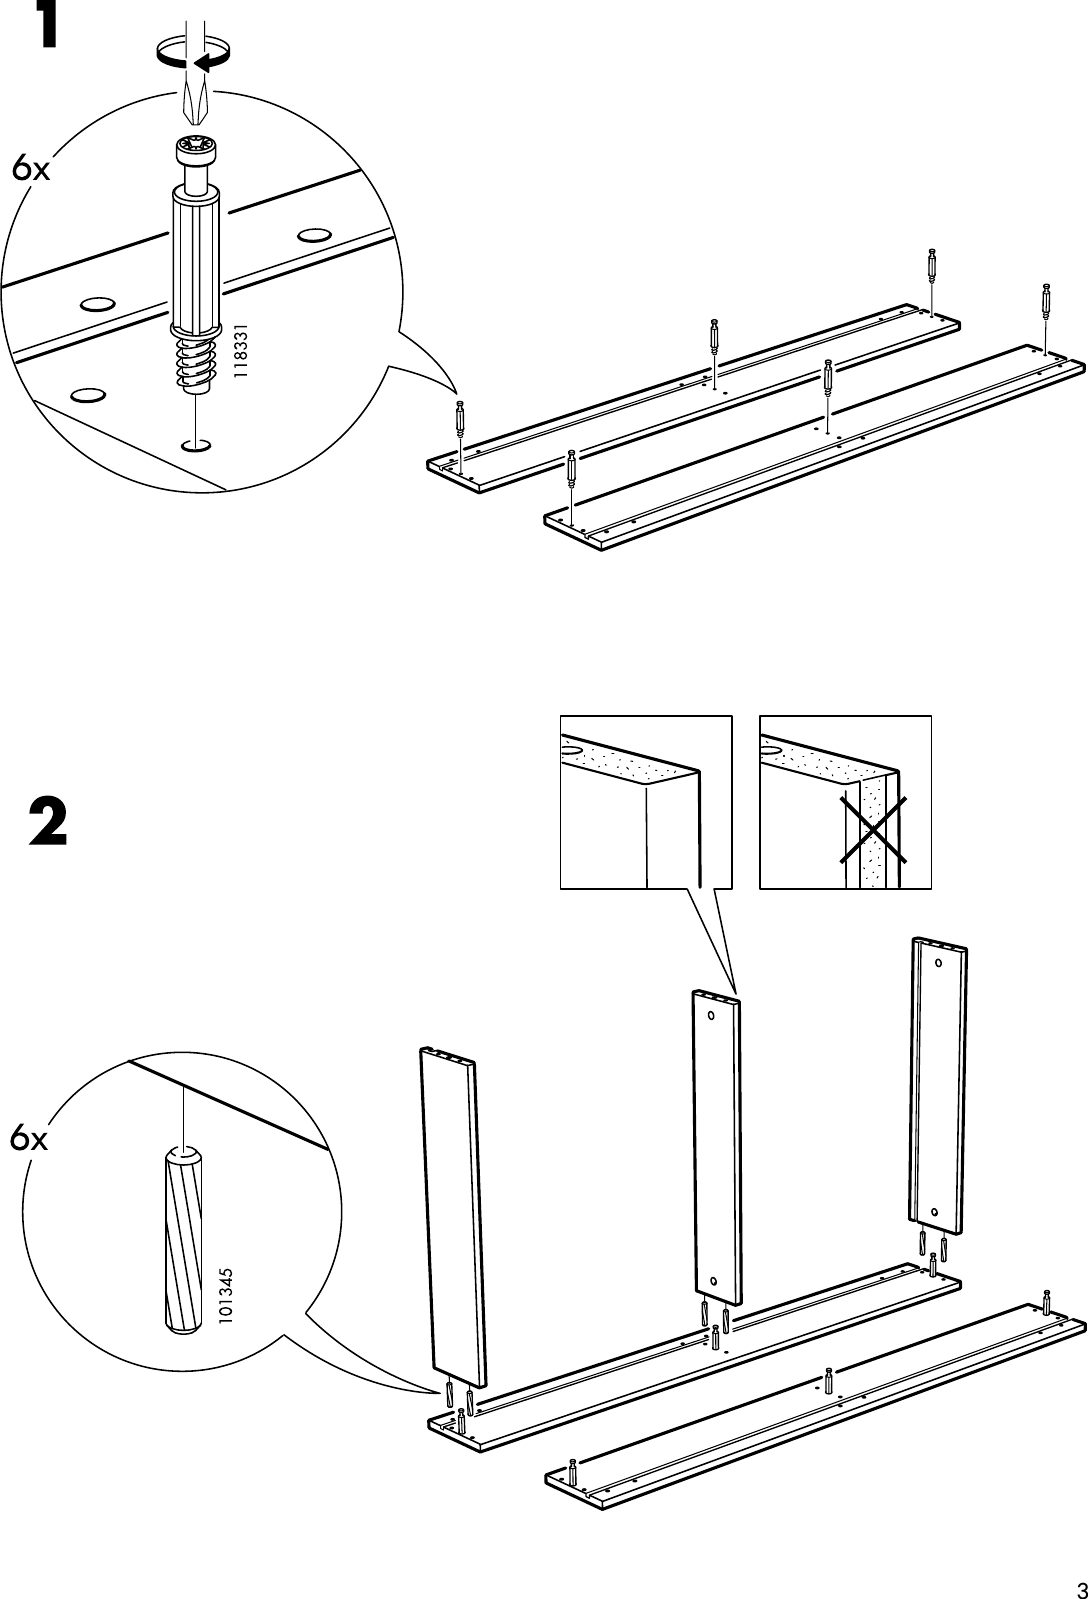 Page 3 of 8 - Ikea Ikea-Engan-Bed-Storage-Box-Assembly-Instruction